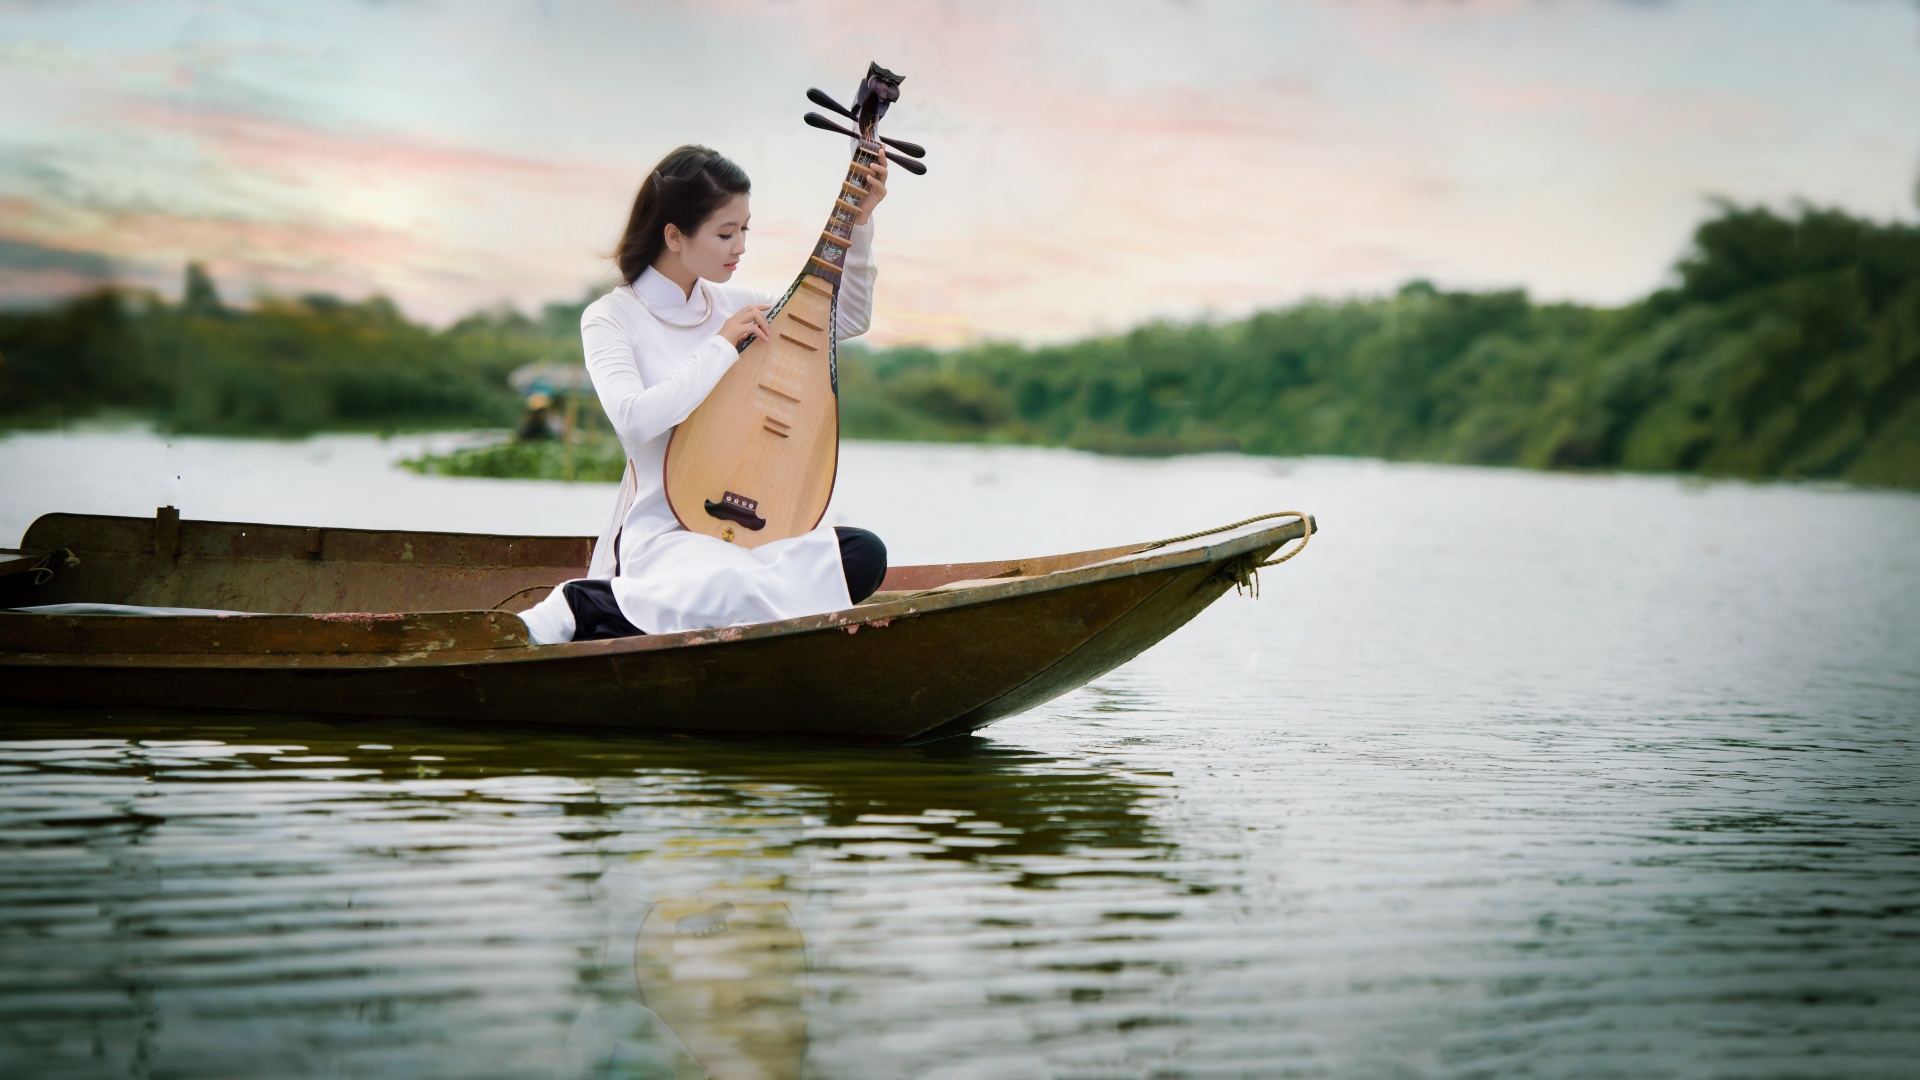 Asian Photography Model Women Women With Boats Traditional Clothing White Dress Brunette Guitarist W 1920x1080